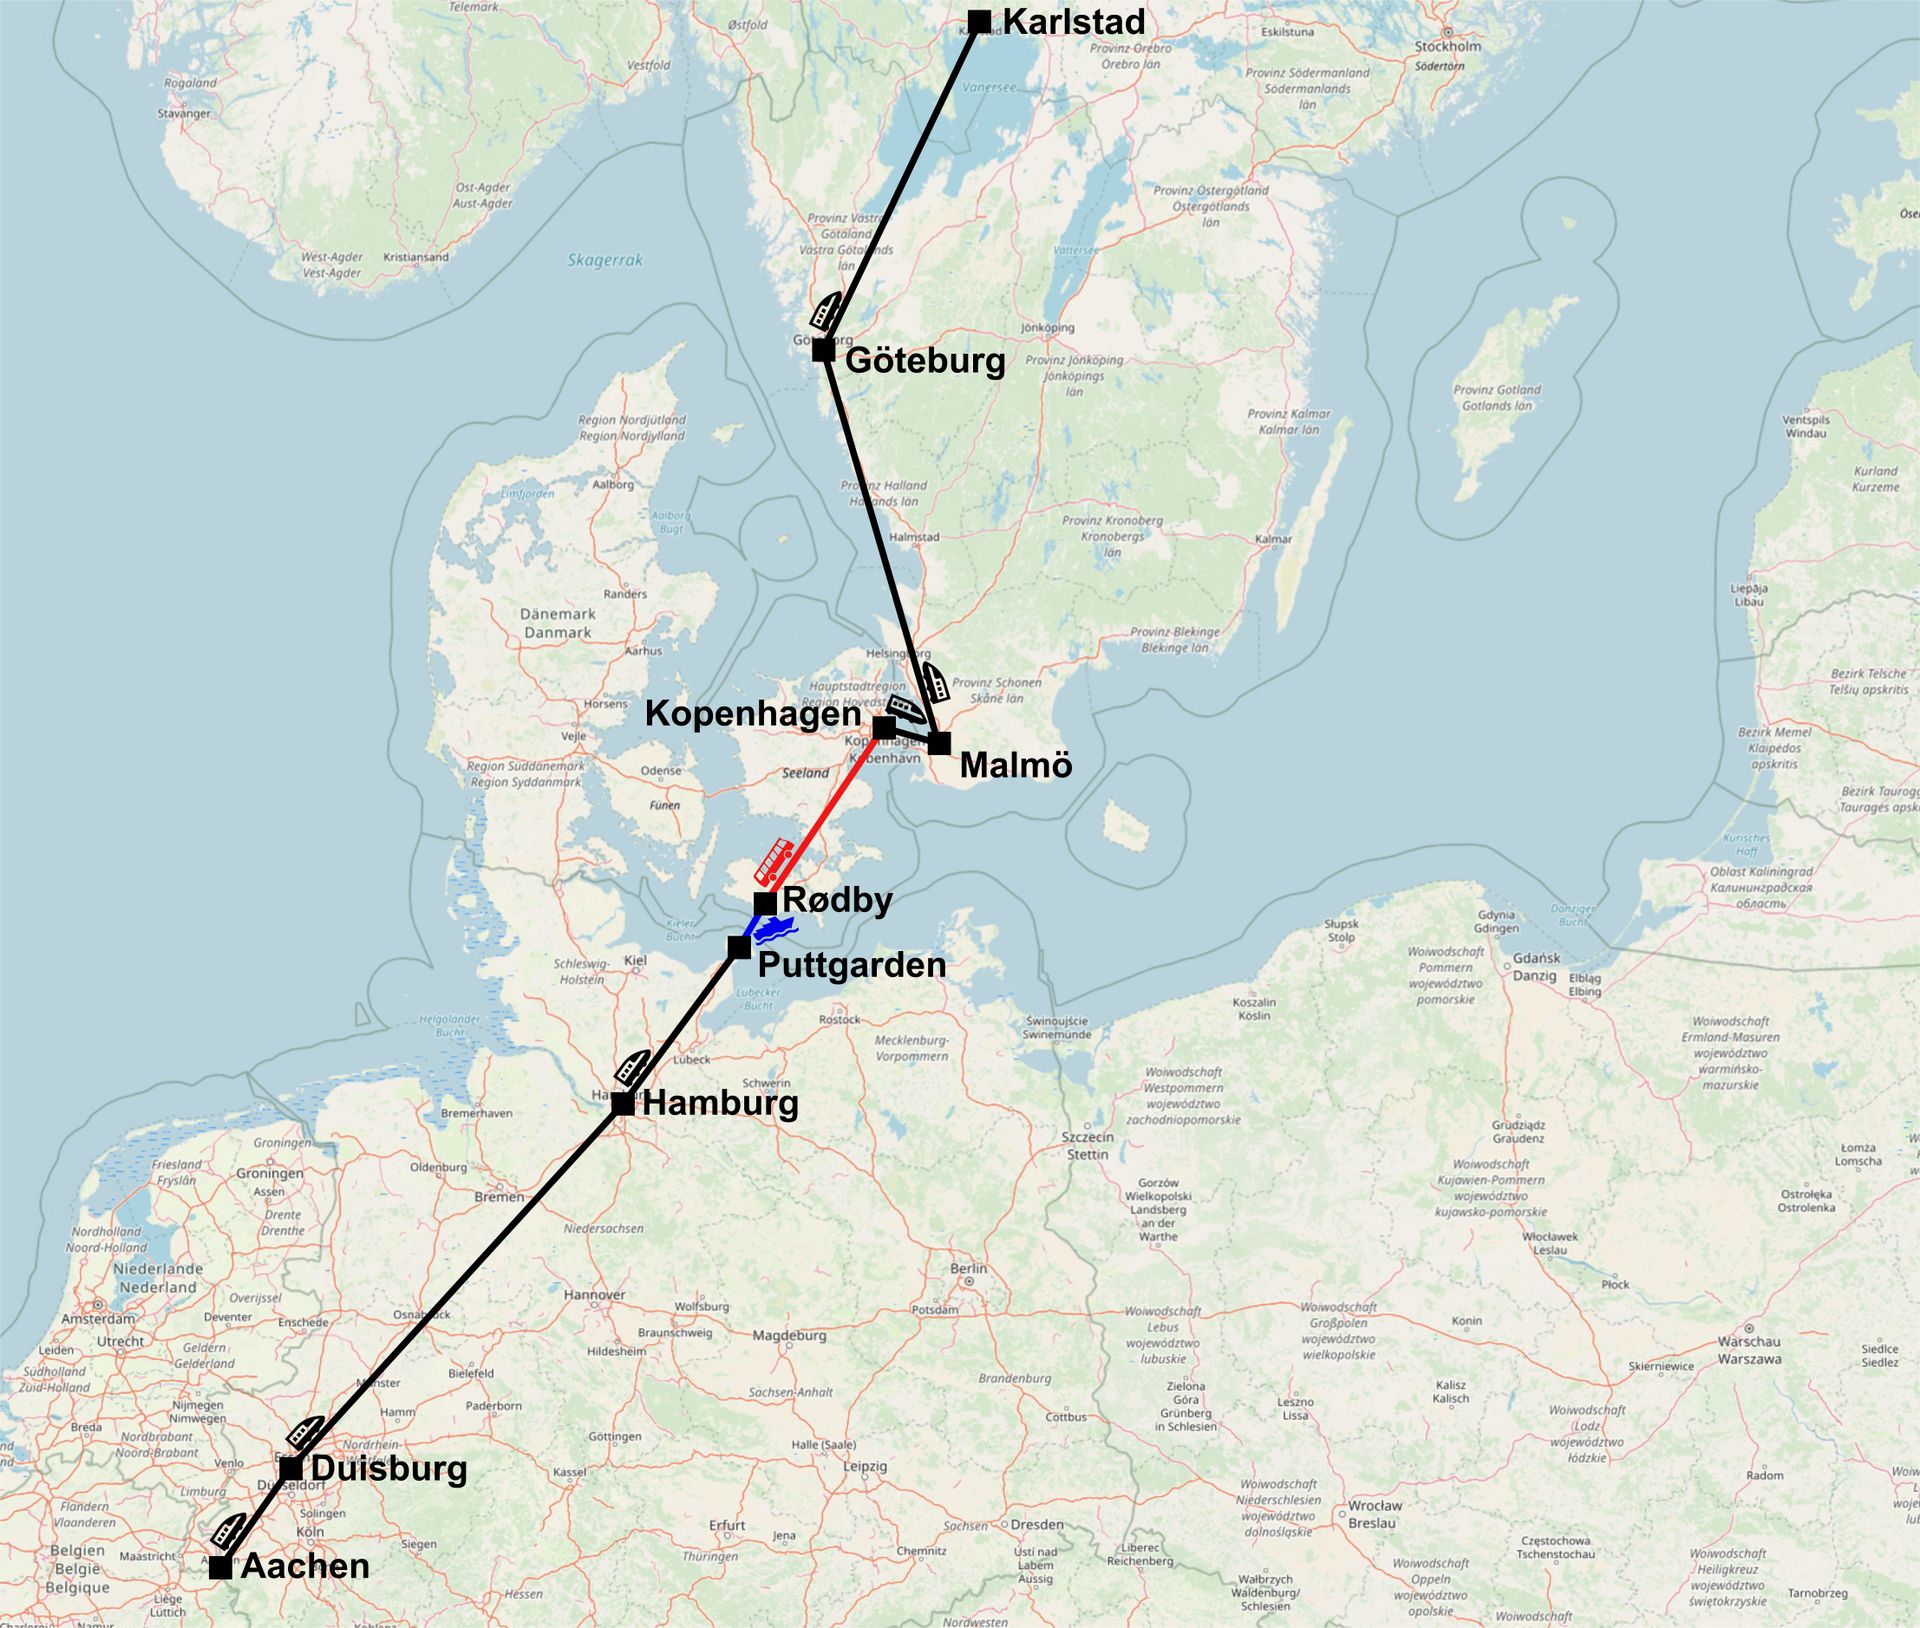 Travel route to Karlstad